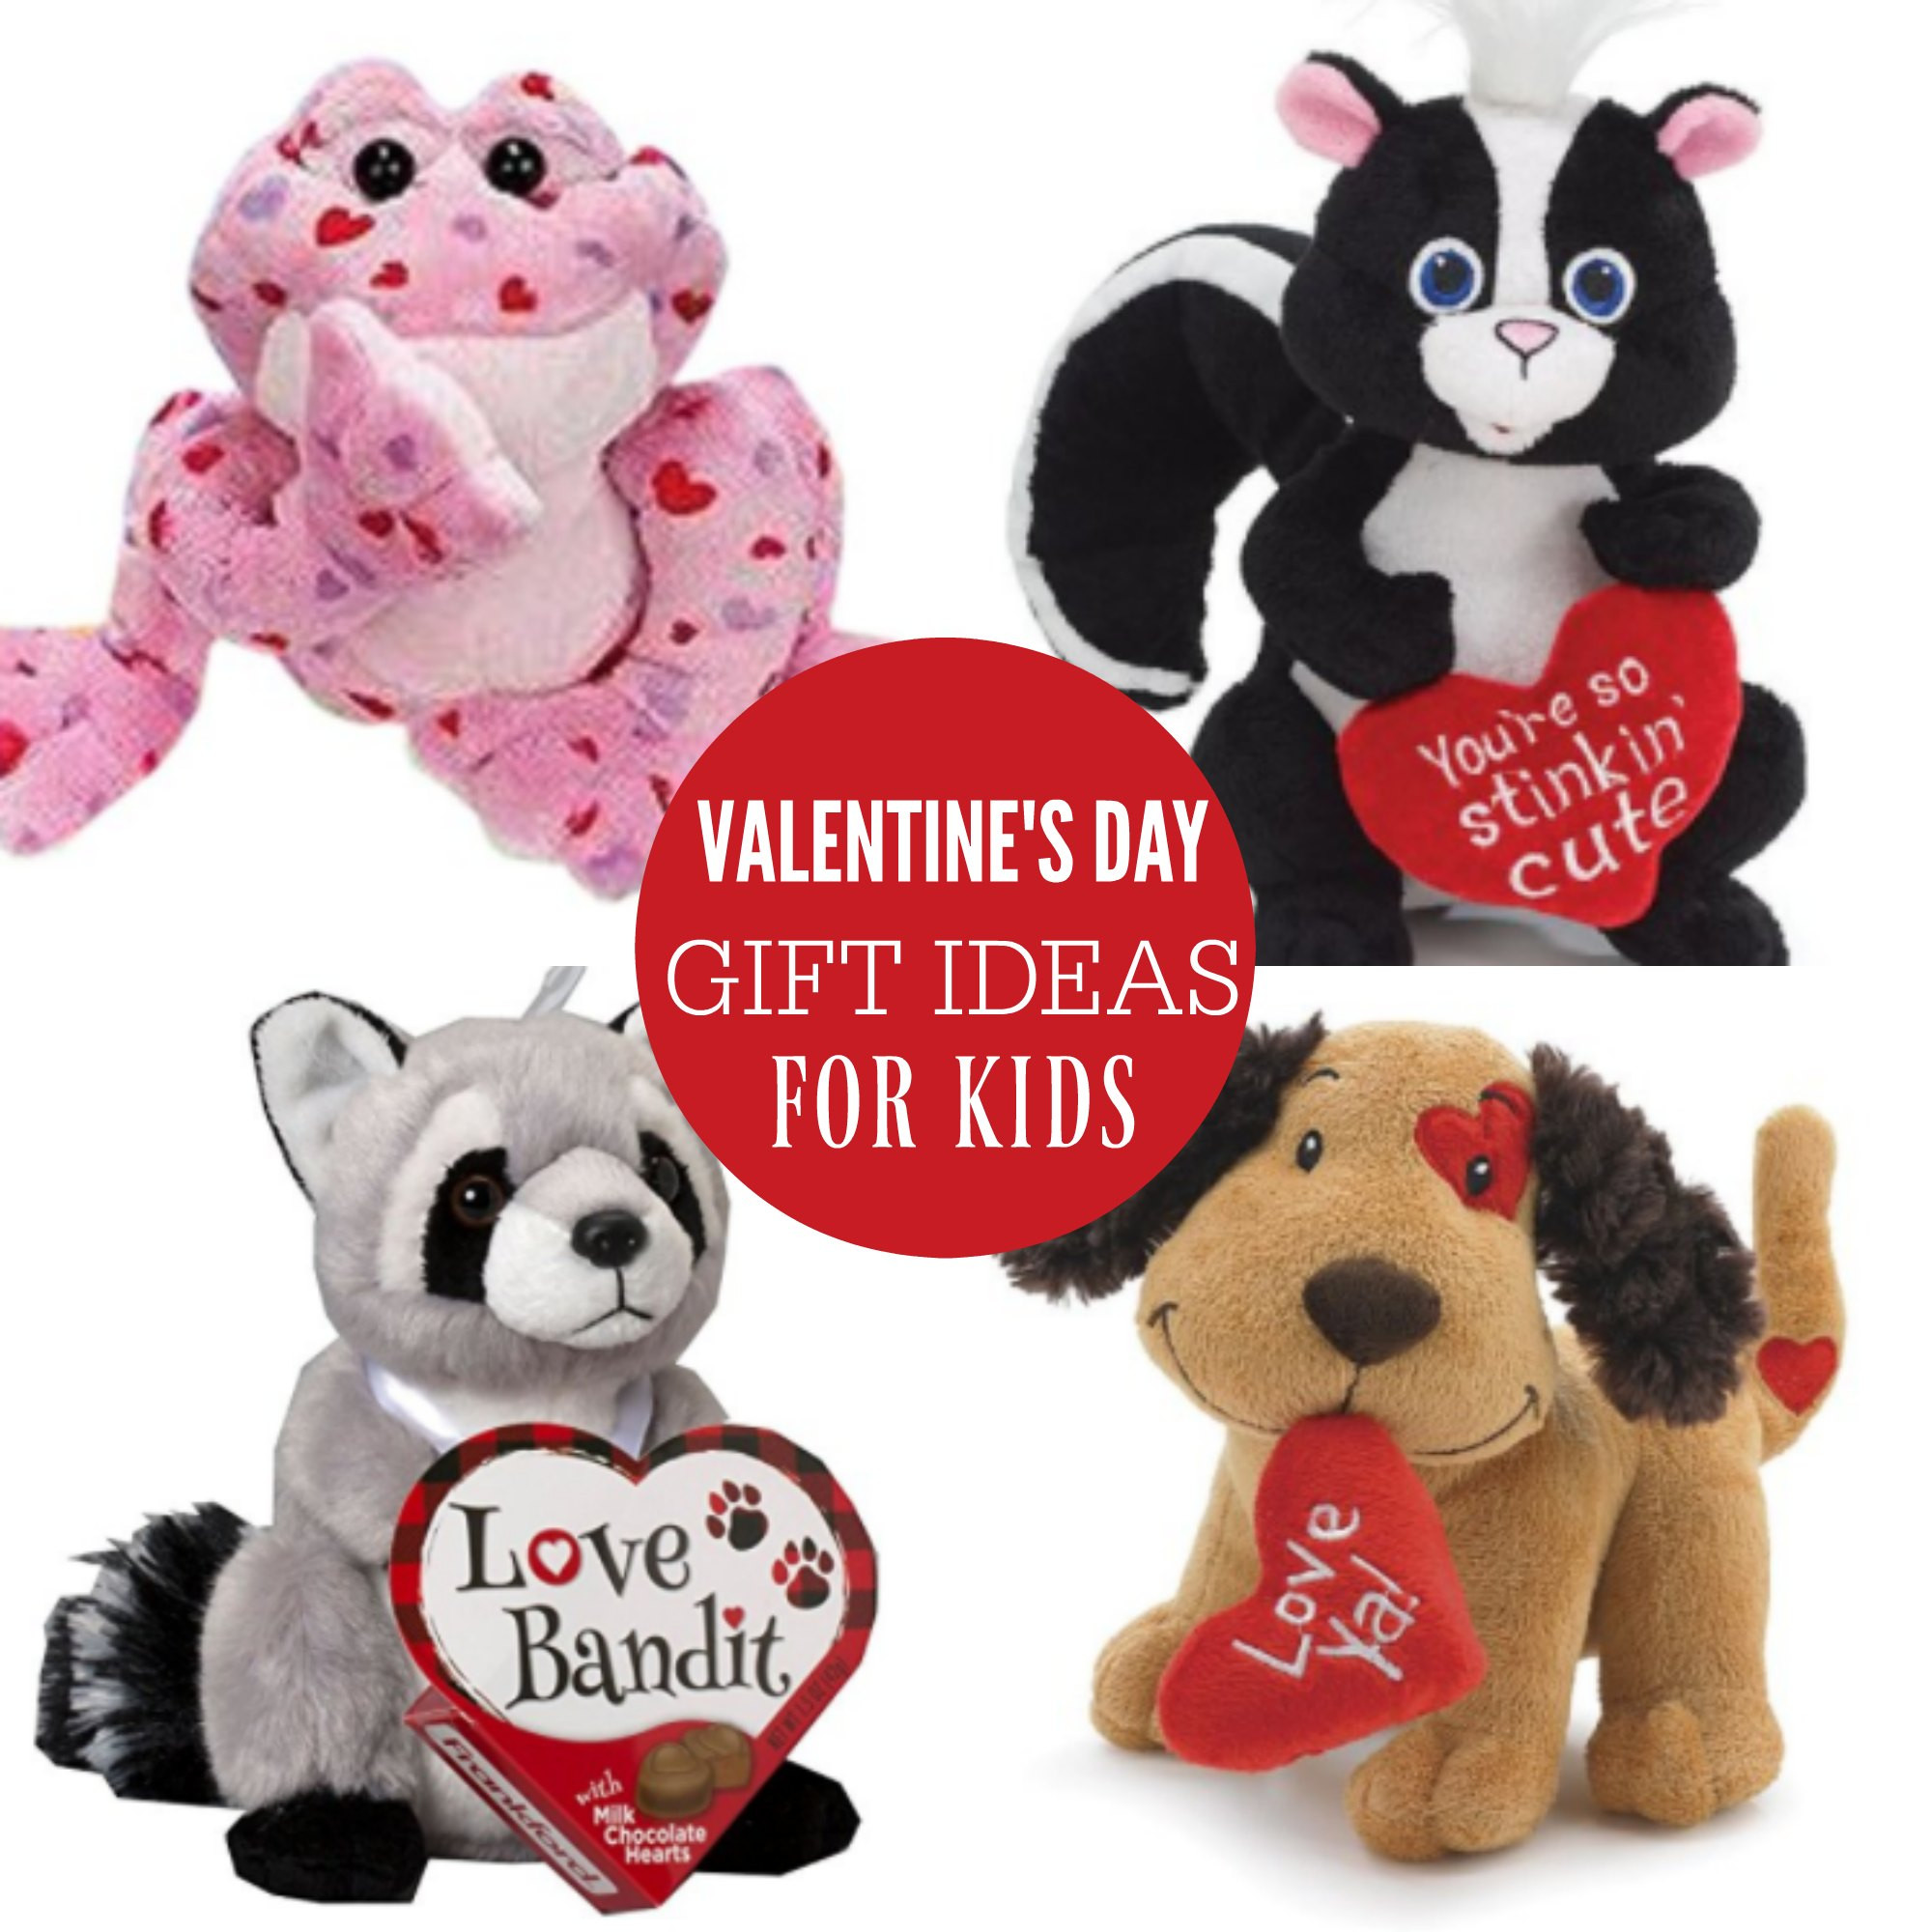 Ideas For Valentines Gift
 Valentine Gift ideas for Kids That they will love e